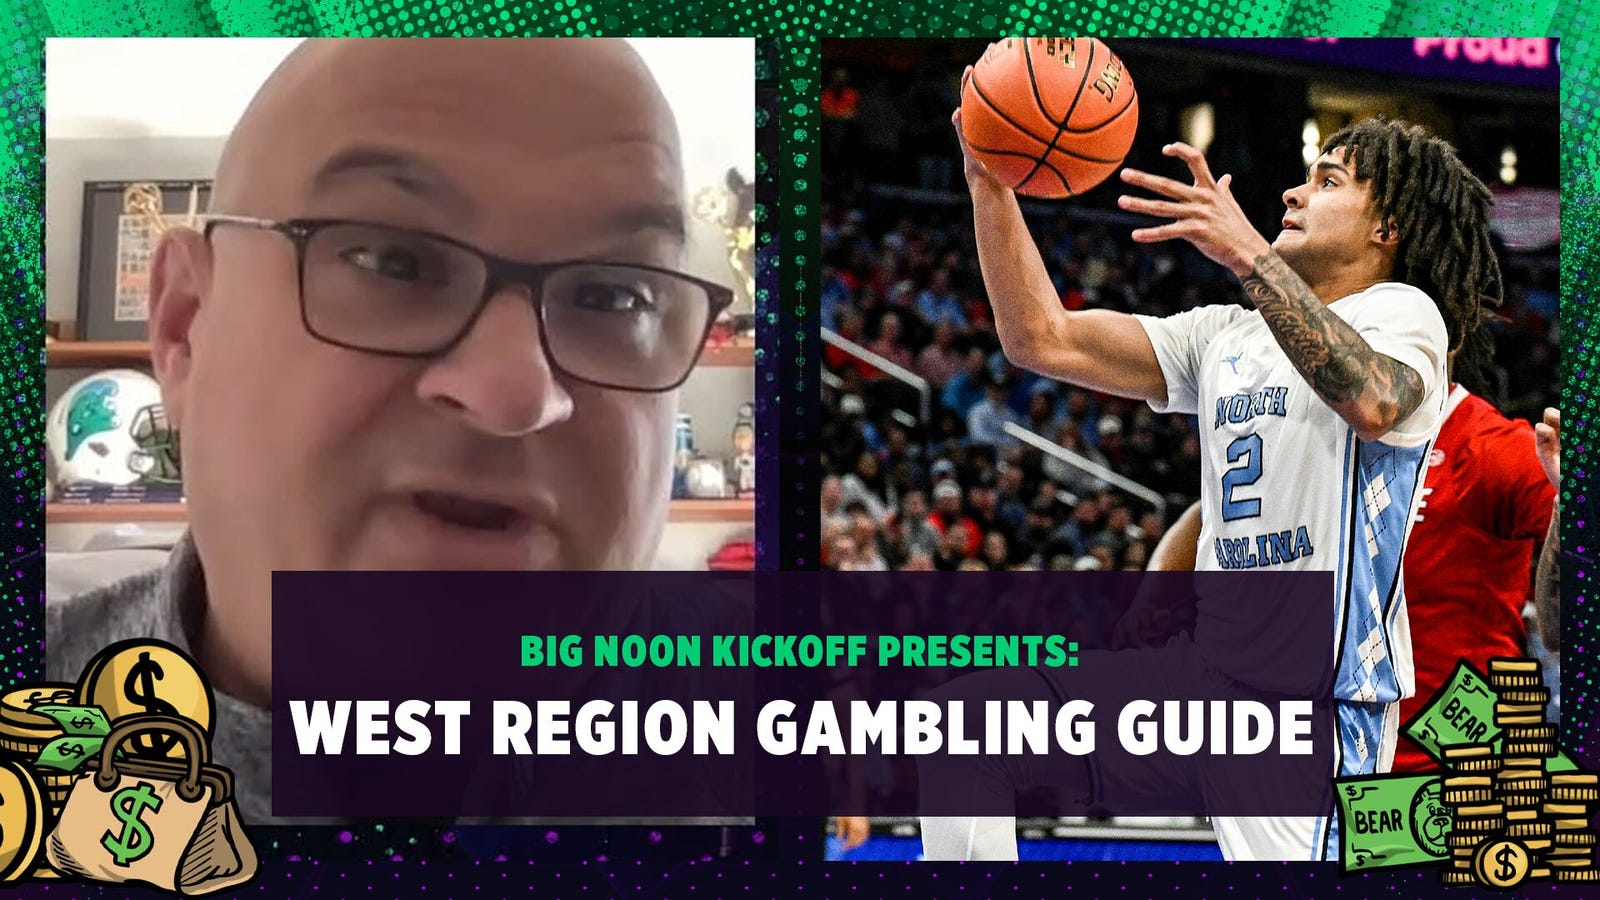 March Madness: West Region Gambling Guide